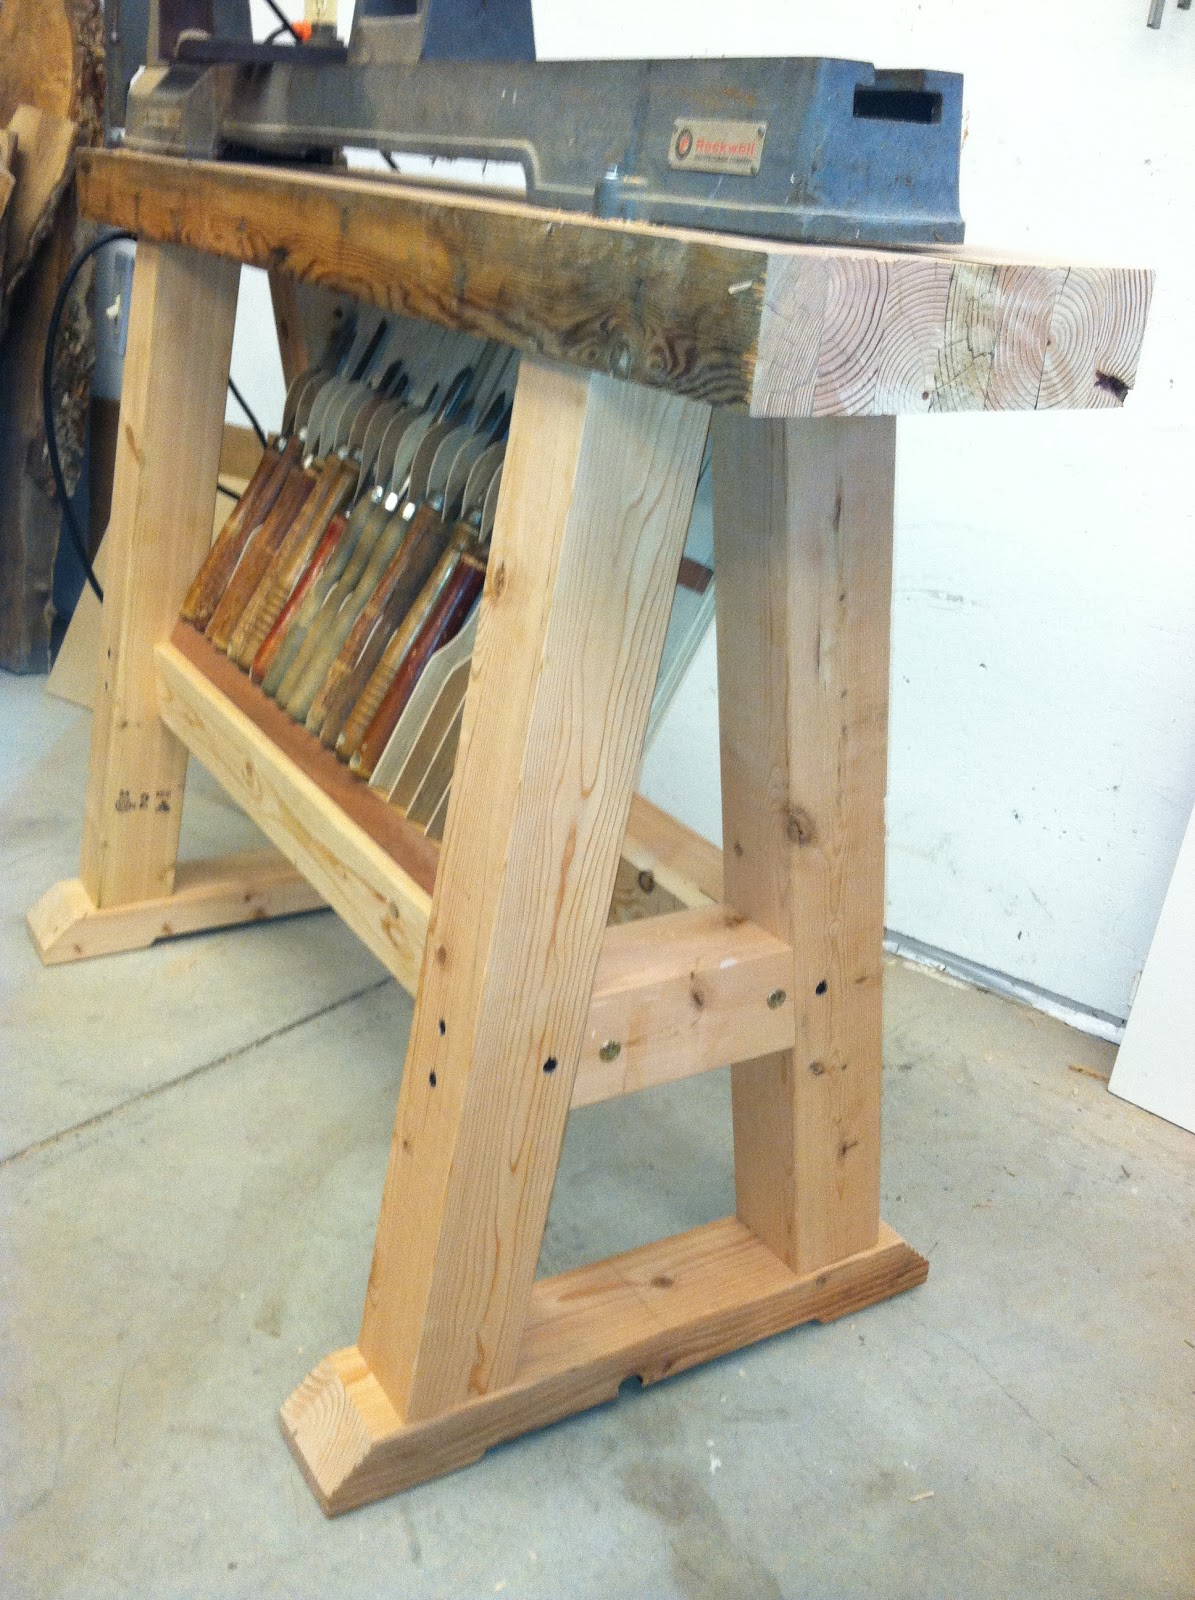 RusticWorks - Wood Working Photo Journal: Lathe Stand Build, from